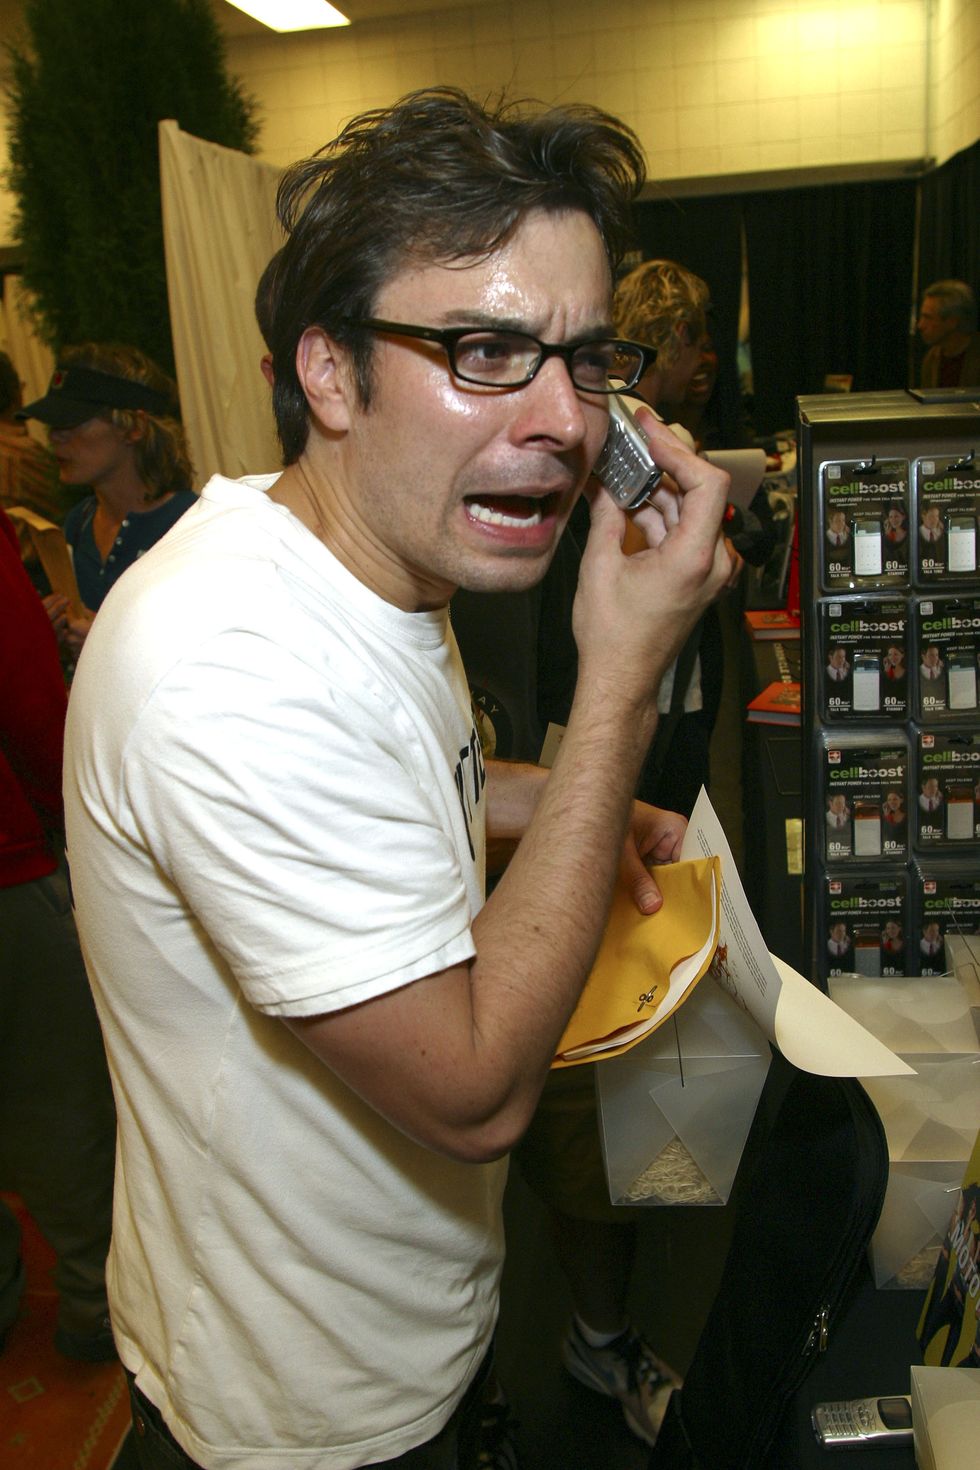 Jimmy Fallon with Motorola C350 phone during 2003 MTV Video Music Awards - Backstage Creations Day 2 at Radio City Music Hall in New York City, New York, United States. (Photo by Mychal Watts/WireImage)